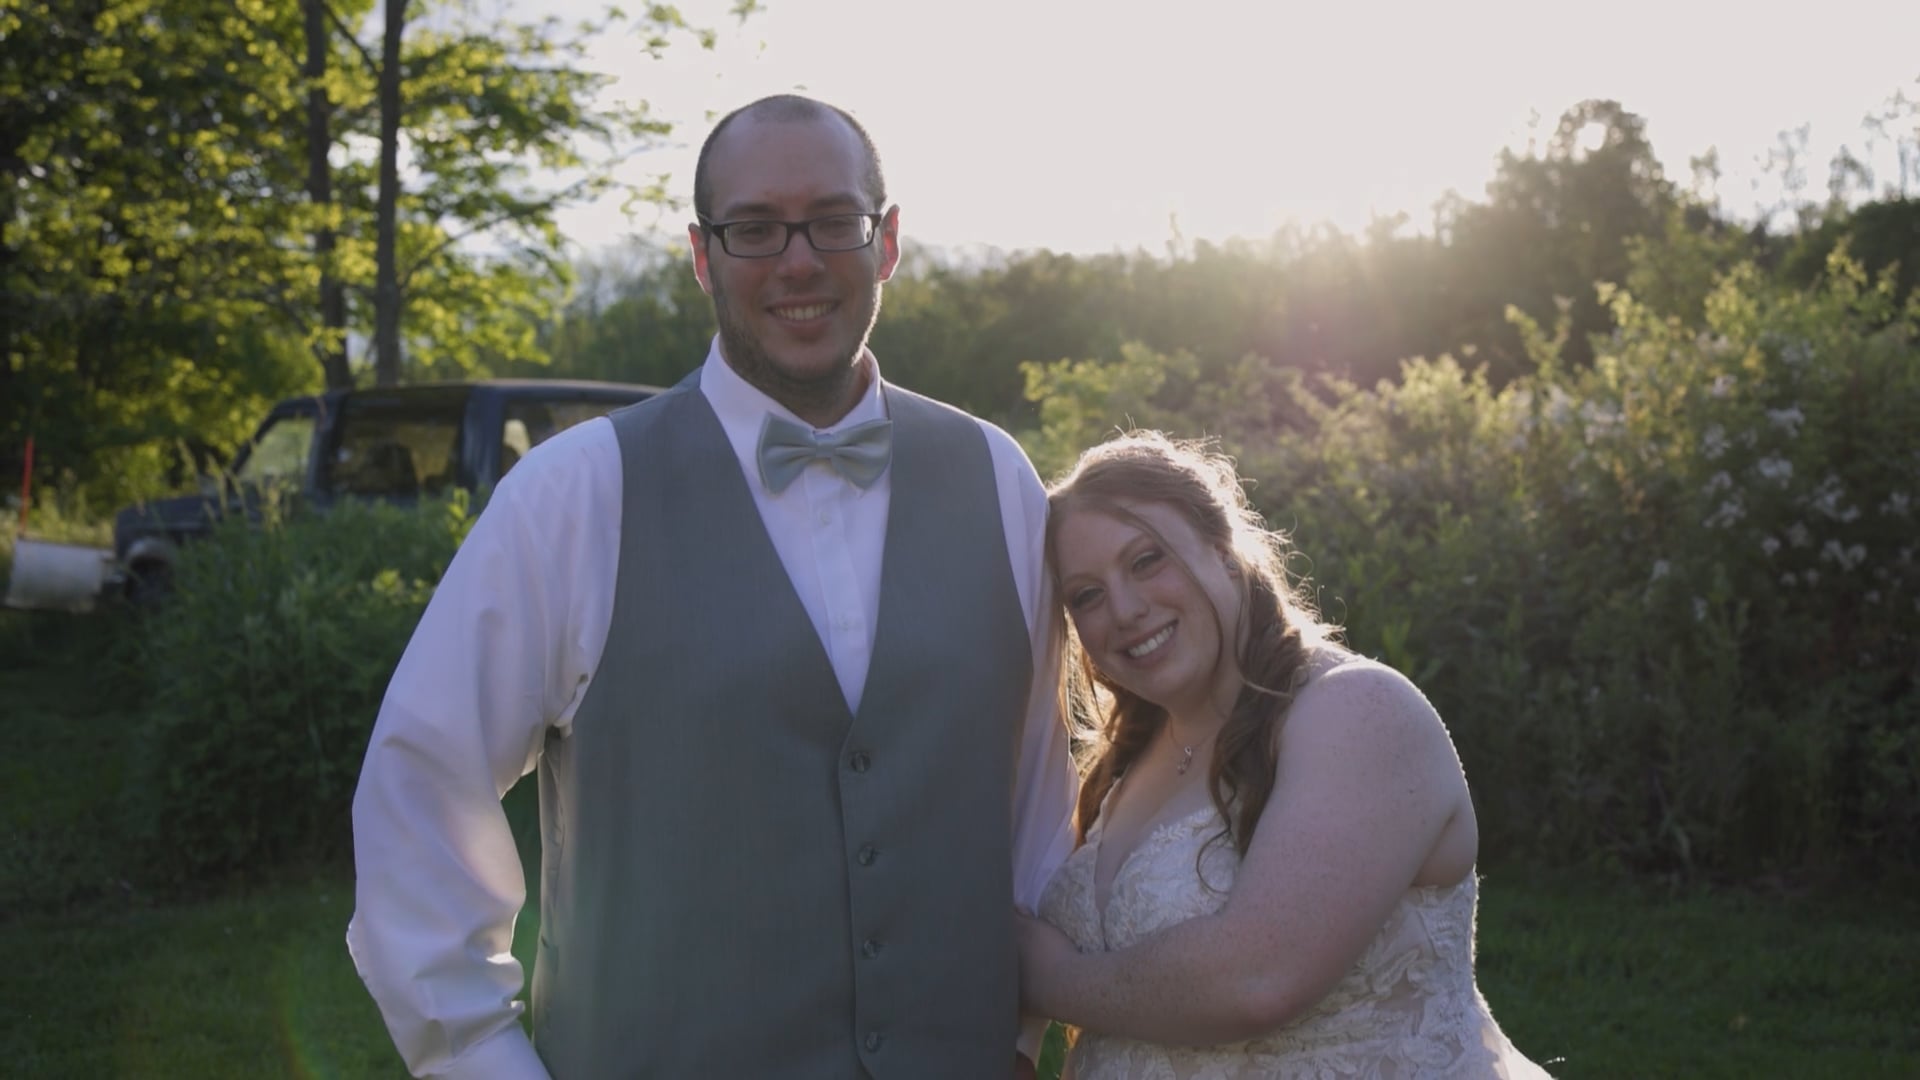 Mike & Carly's Wedding Video May 2022